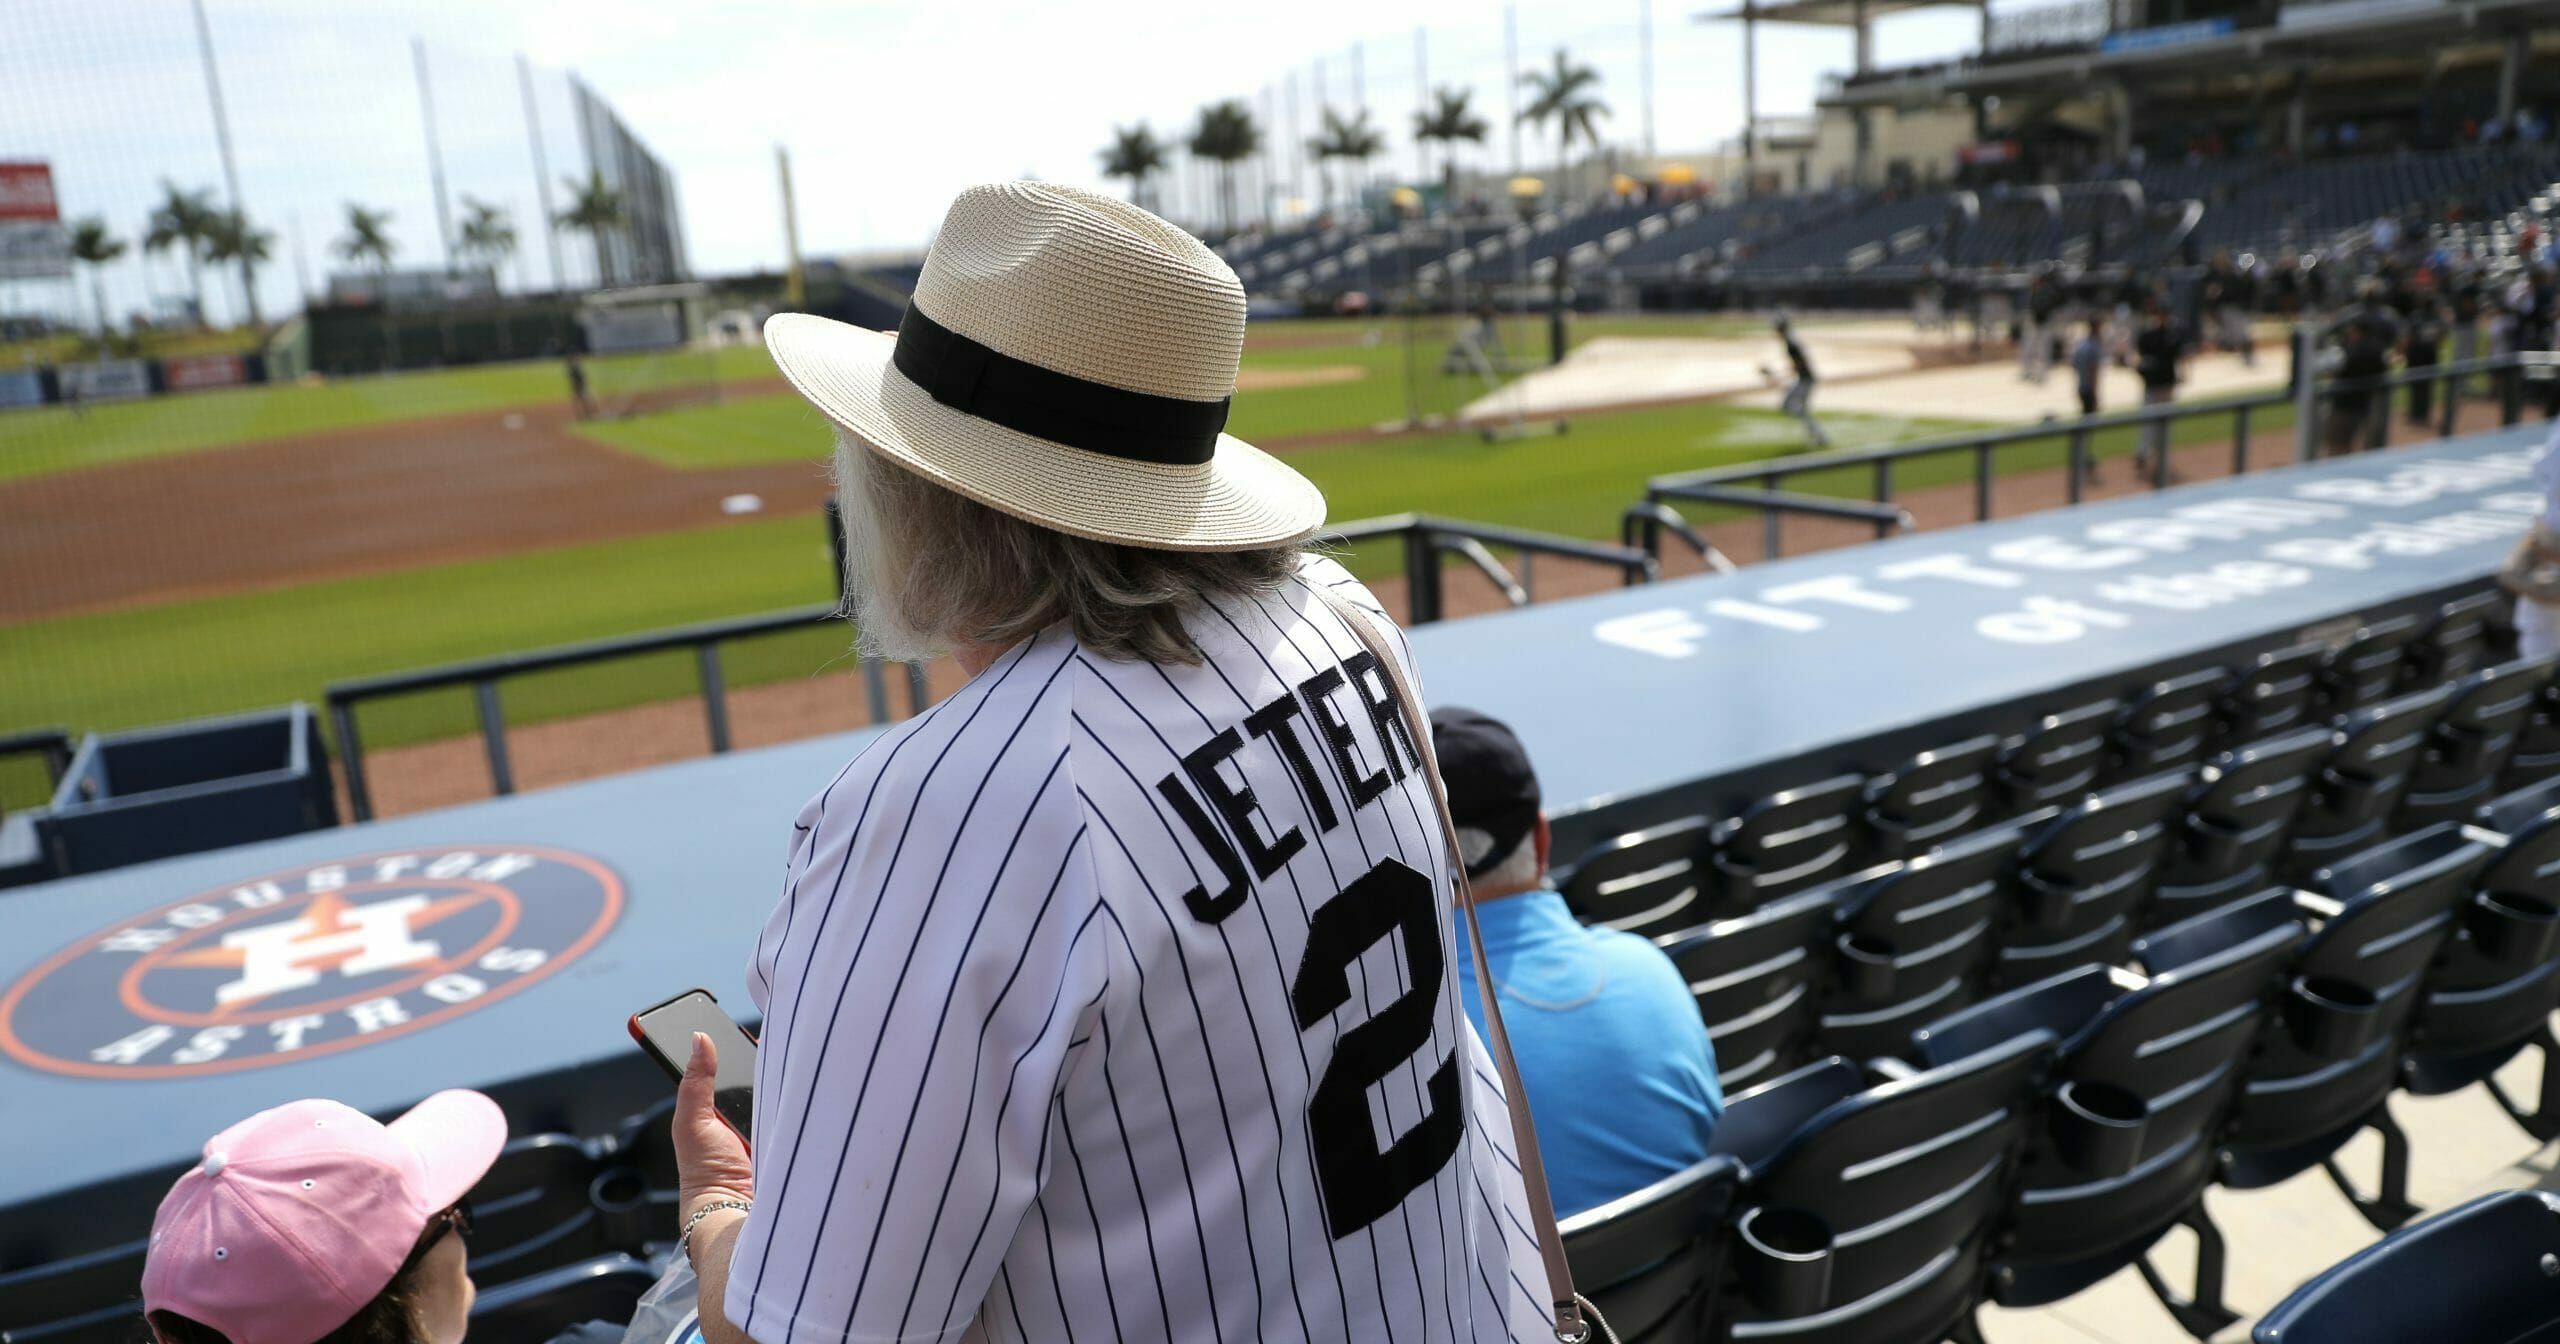 A woman wearing a Derek Jeter jersey settles into her seat prior to a spring training game between the New York Yankees and the Washington Nationals on March 12, 2020, in West Palm Beach, Florida.